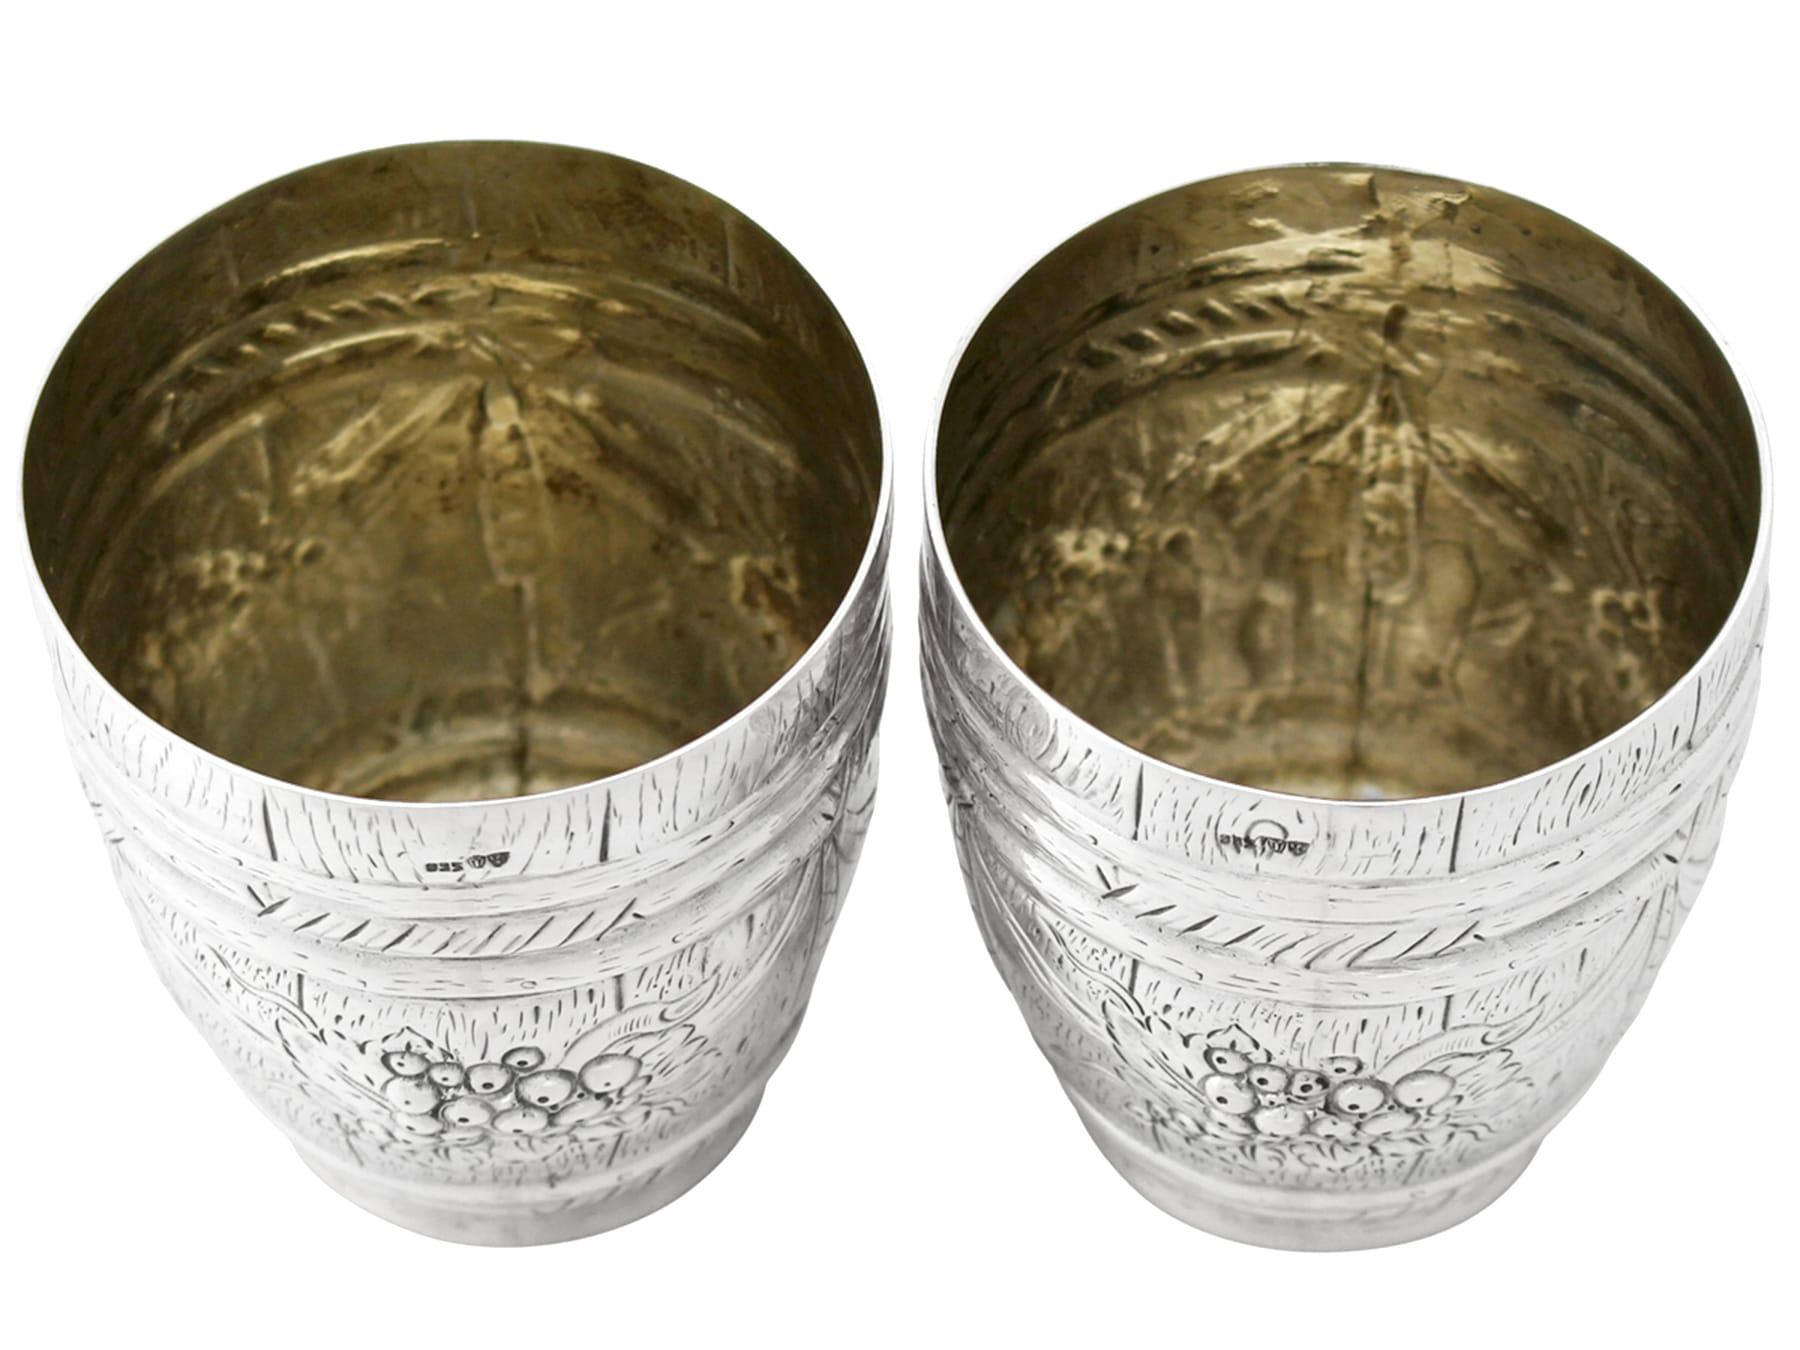 Ludwig Neresheimer Antique German Silver Beaker, Circa 1900 In Excellent Condition For Sale In Jesmond, Newcastle Upon Tyne